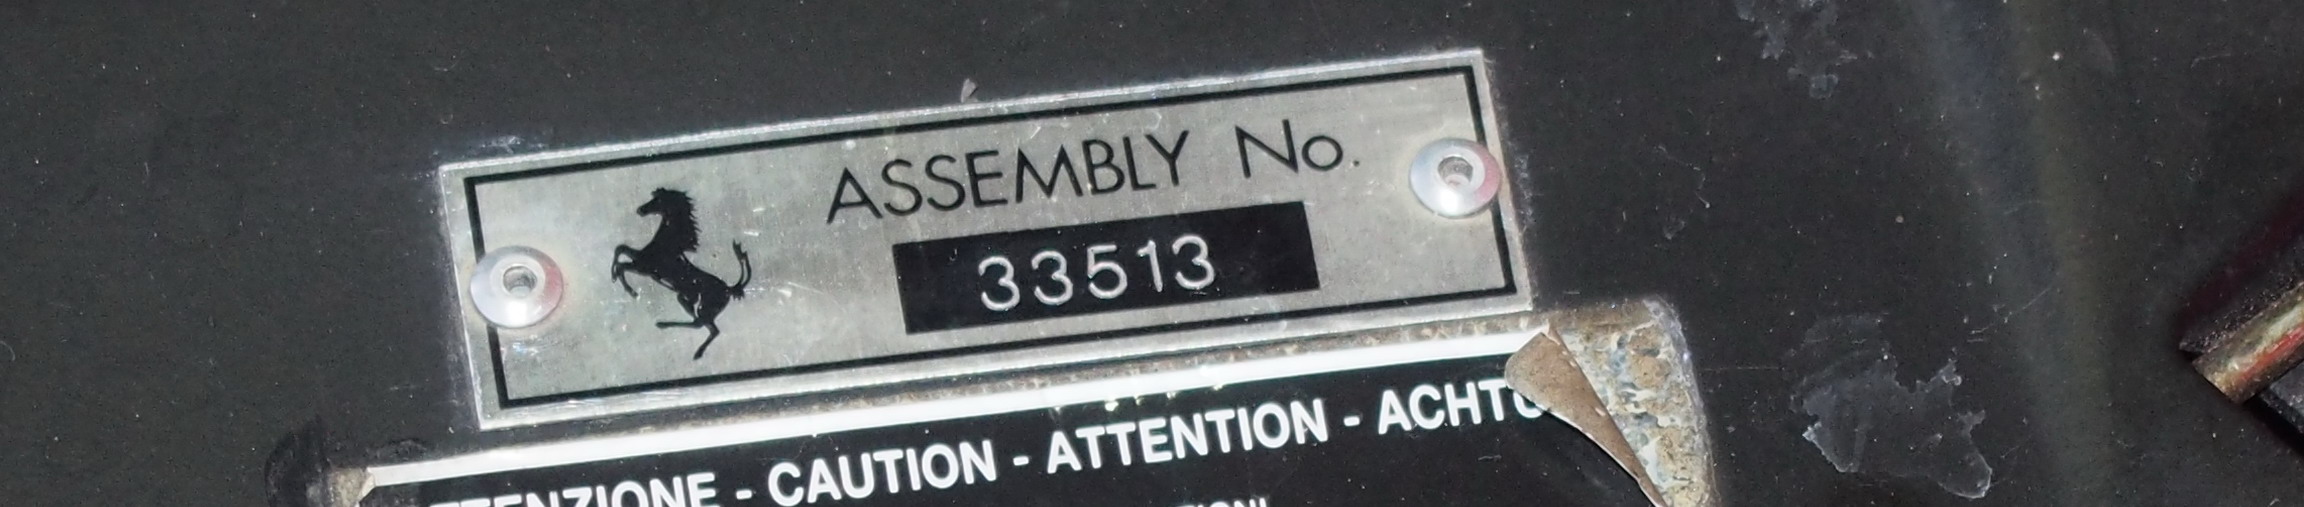 7 Assembly Numbers